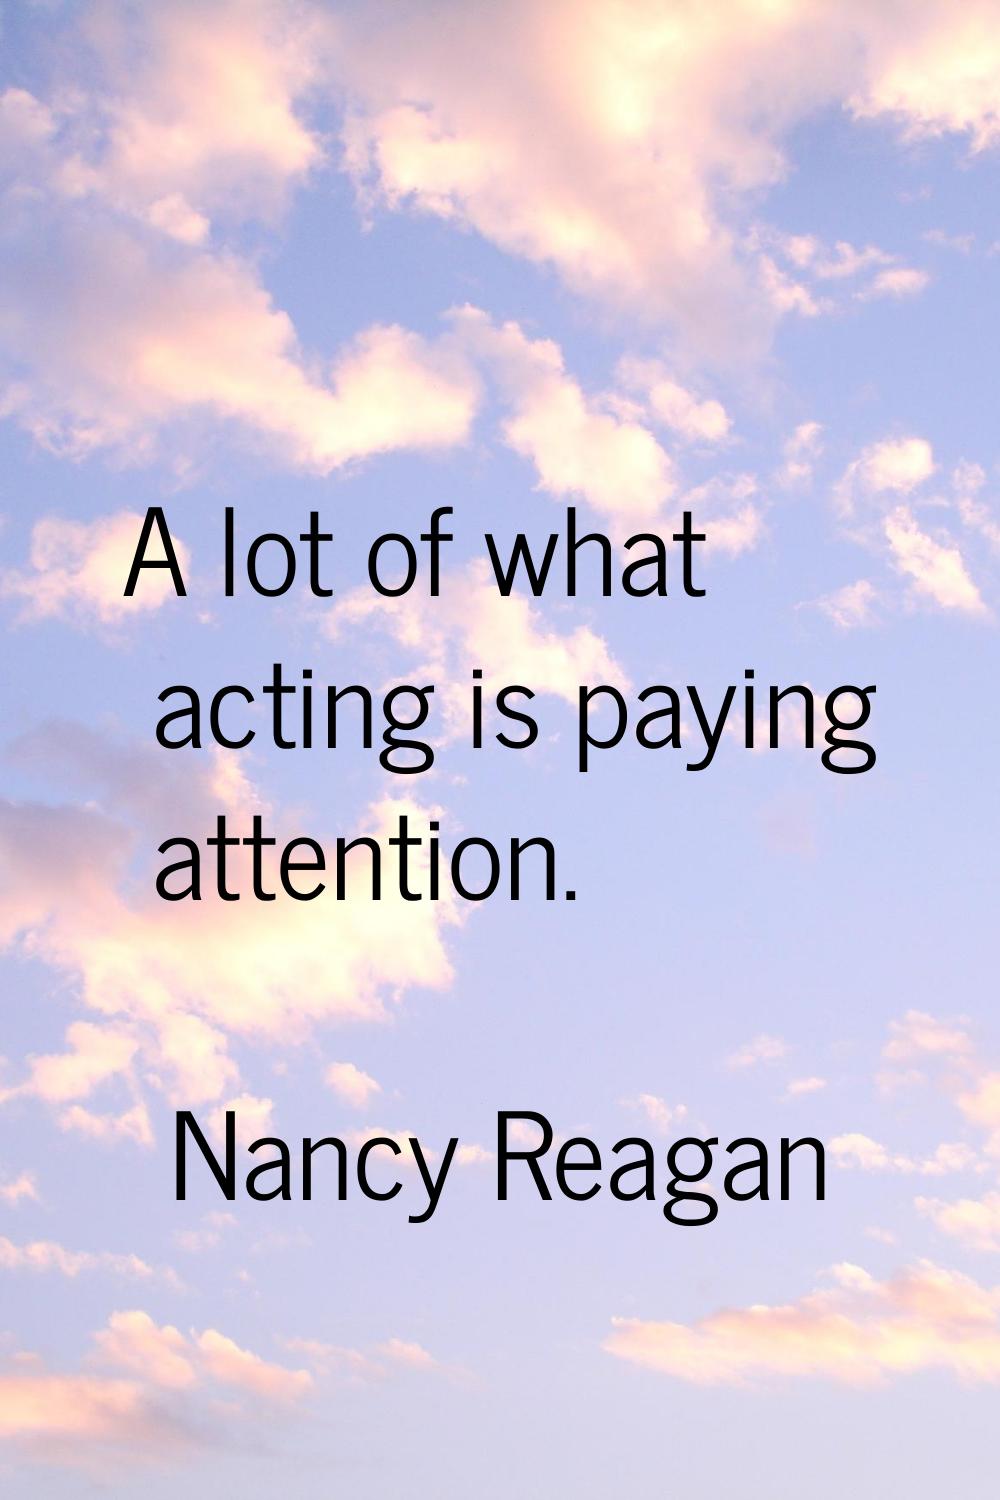 A lot of what acting is paying attention.